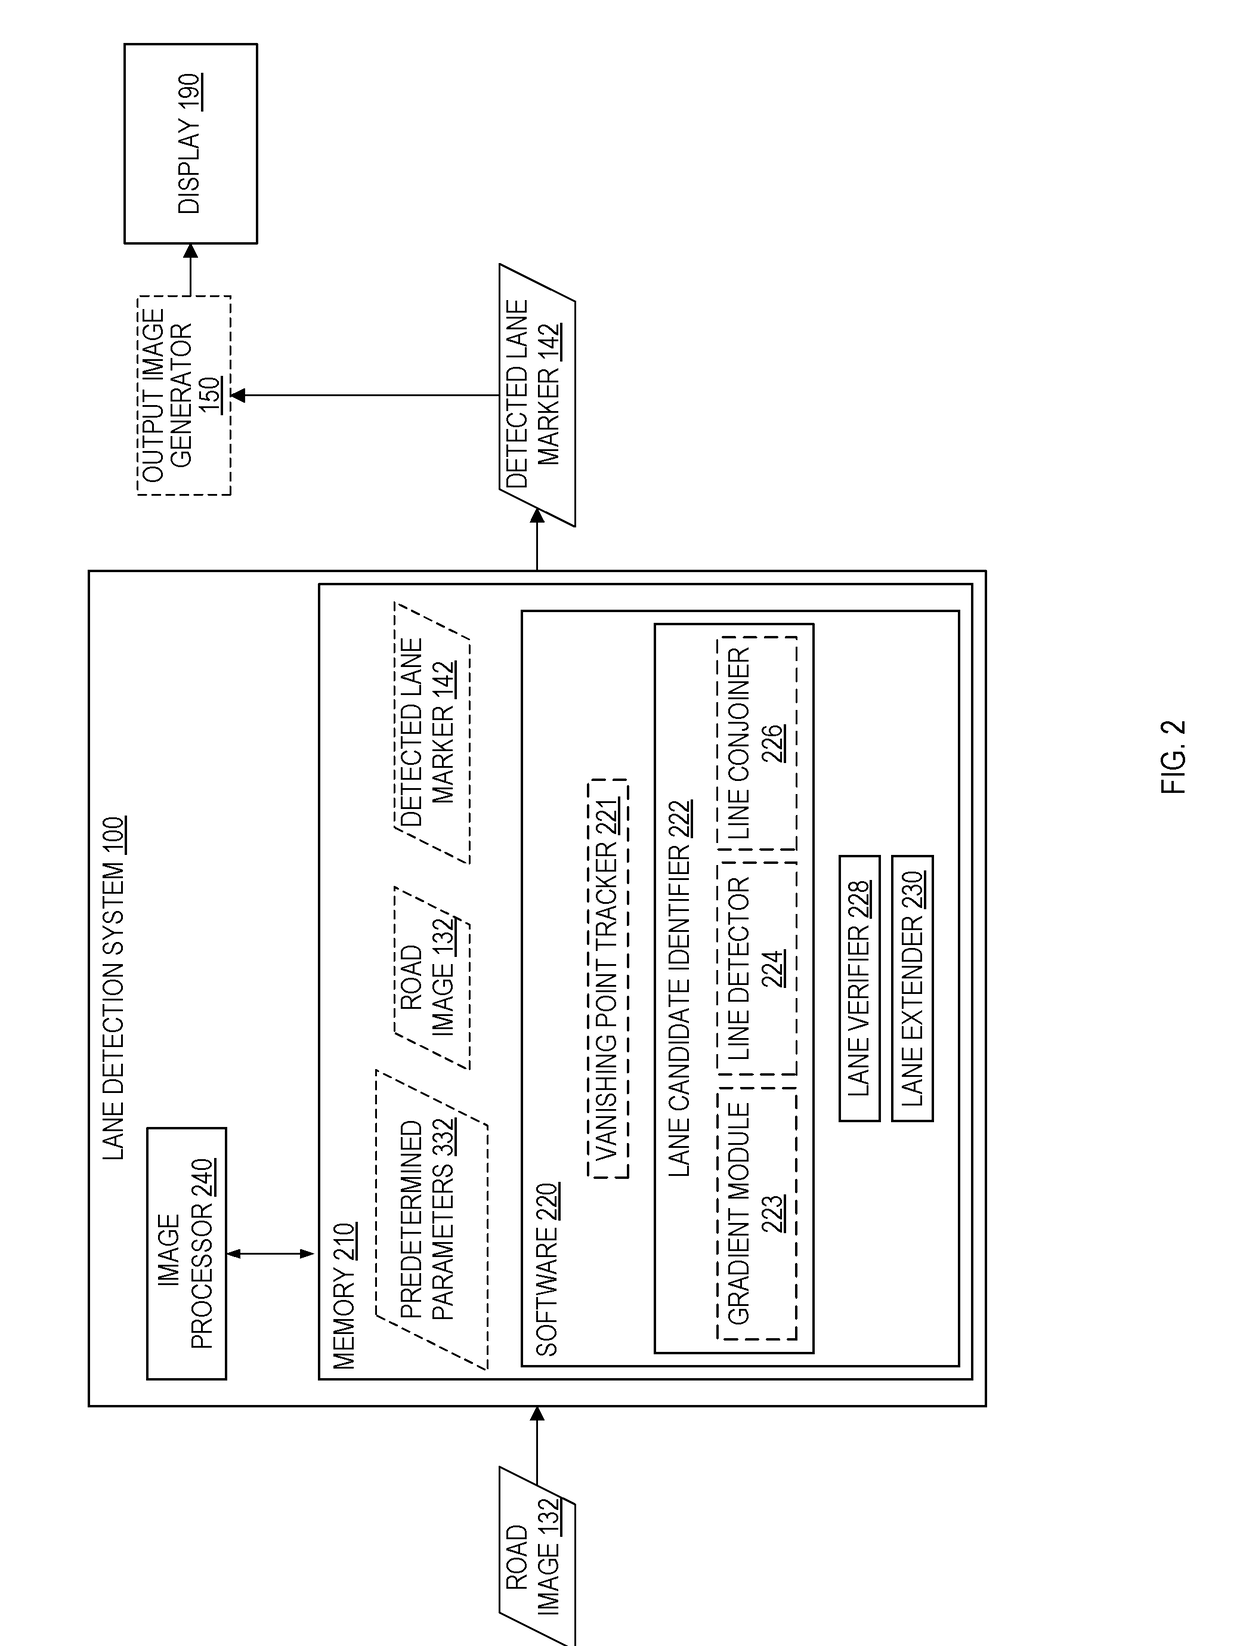 Lane Detection System And Method